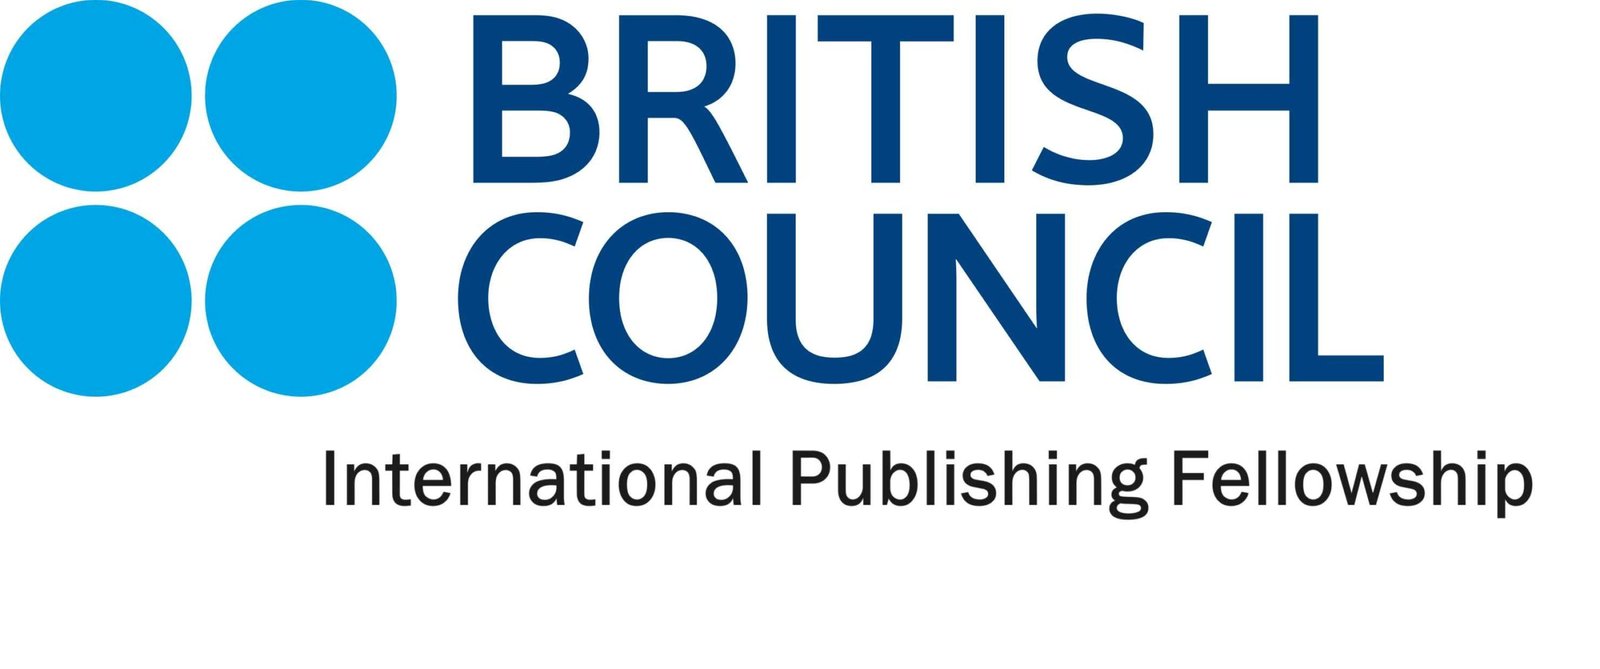 British Council appoints Carat India to handle media mandate: Best Media  Info